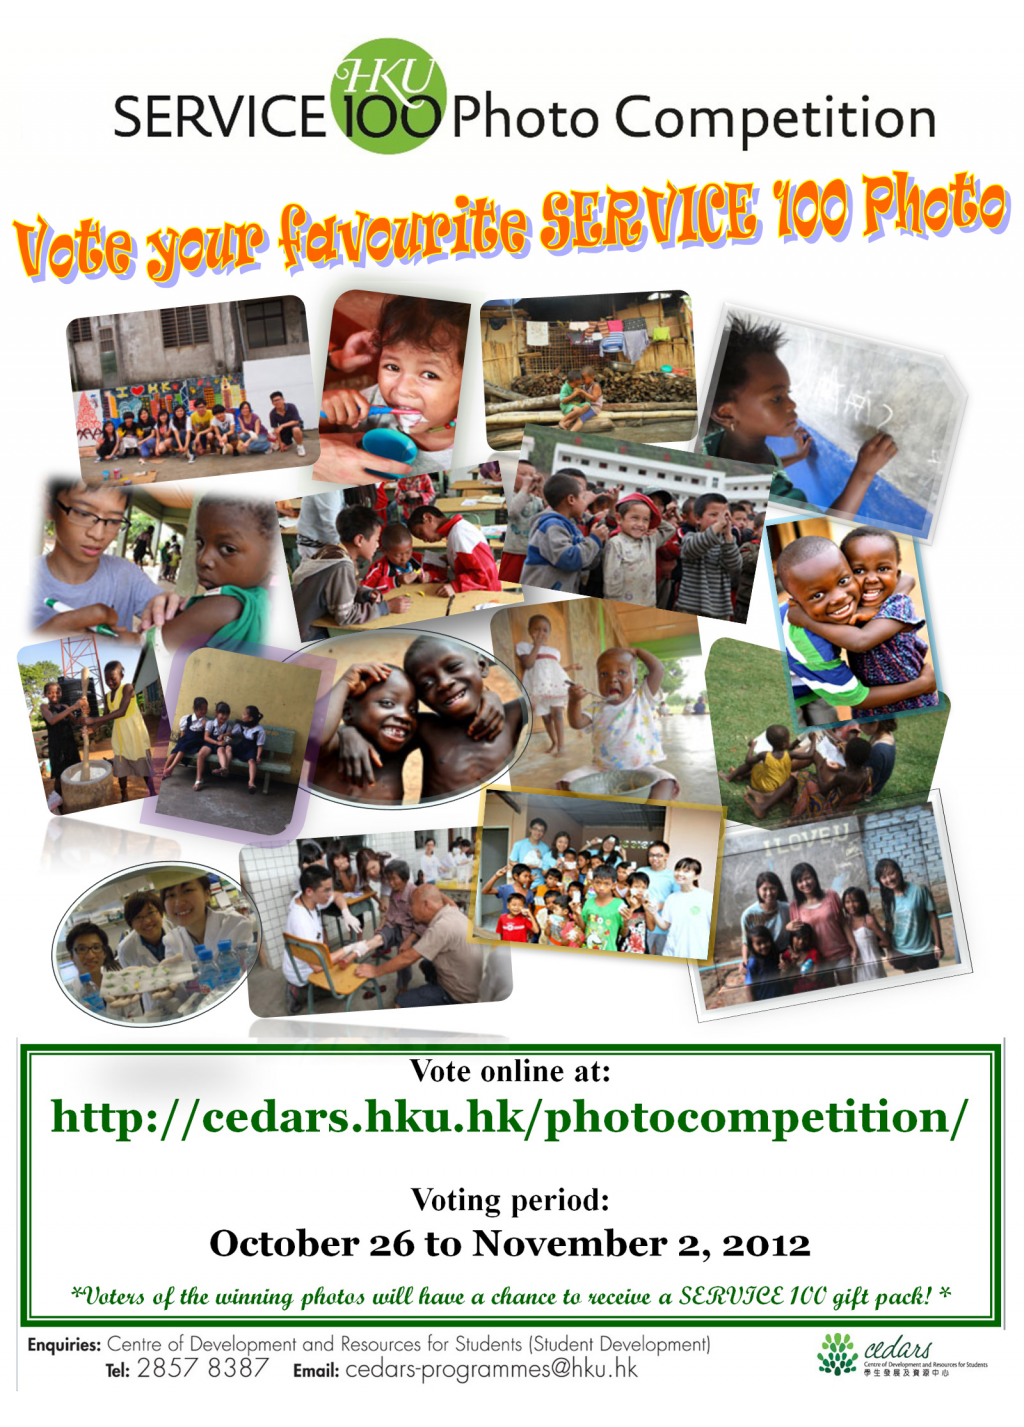 SERVICE 100 Photo Competition: Vote NOW